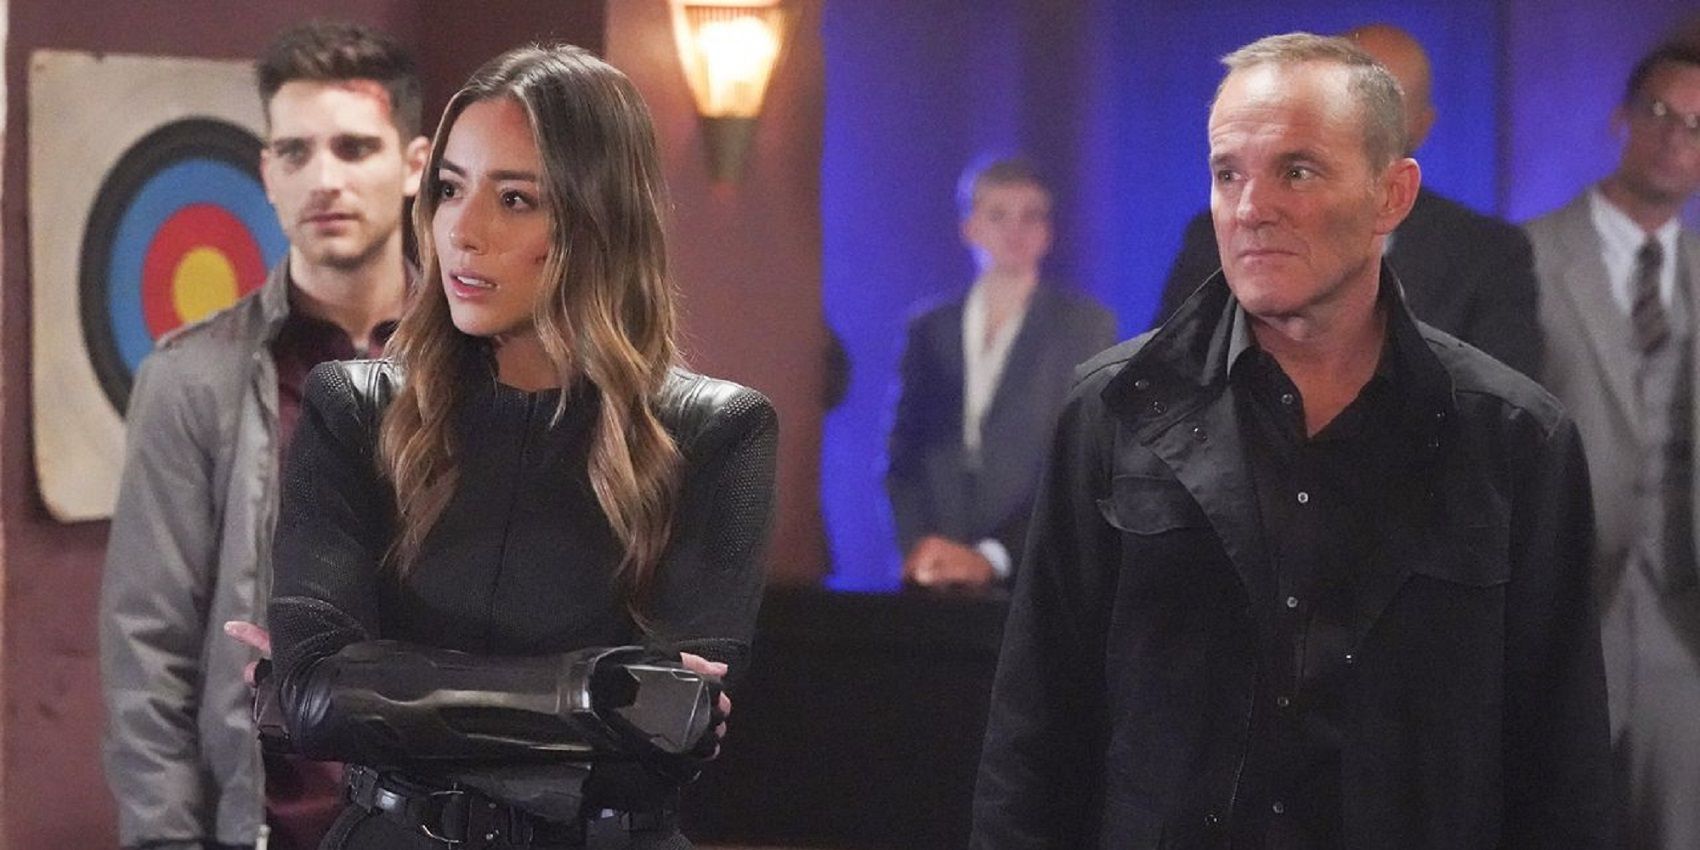 Chloe Bennet as Daisy Quake and Clark Gregg as Coulson in Agents of SHIELD